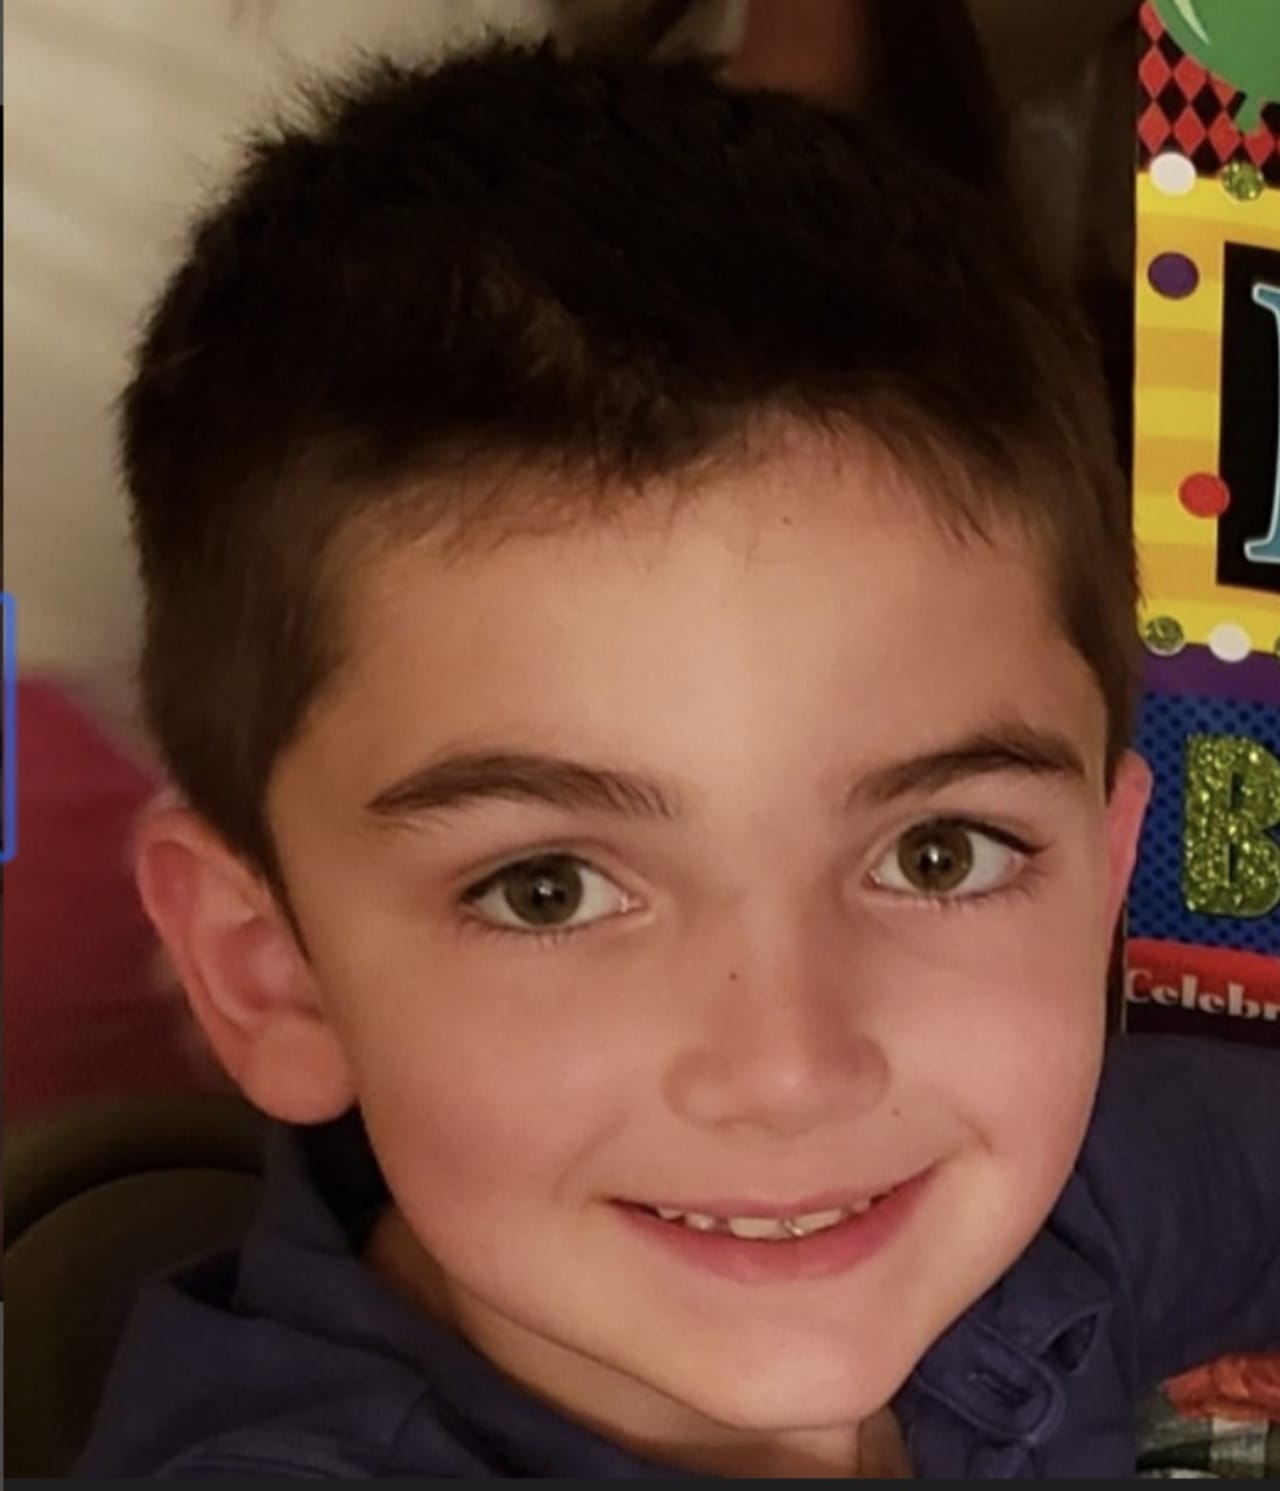 An 8-year-old boy who died after falling in a driveway has been identified by his family.